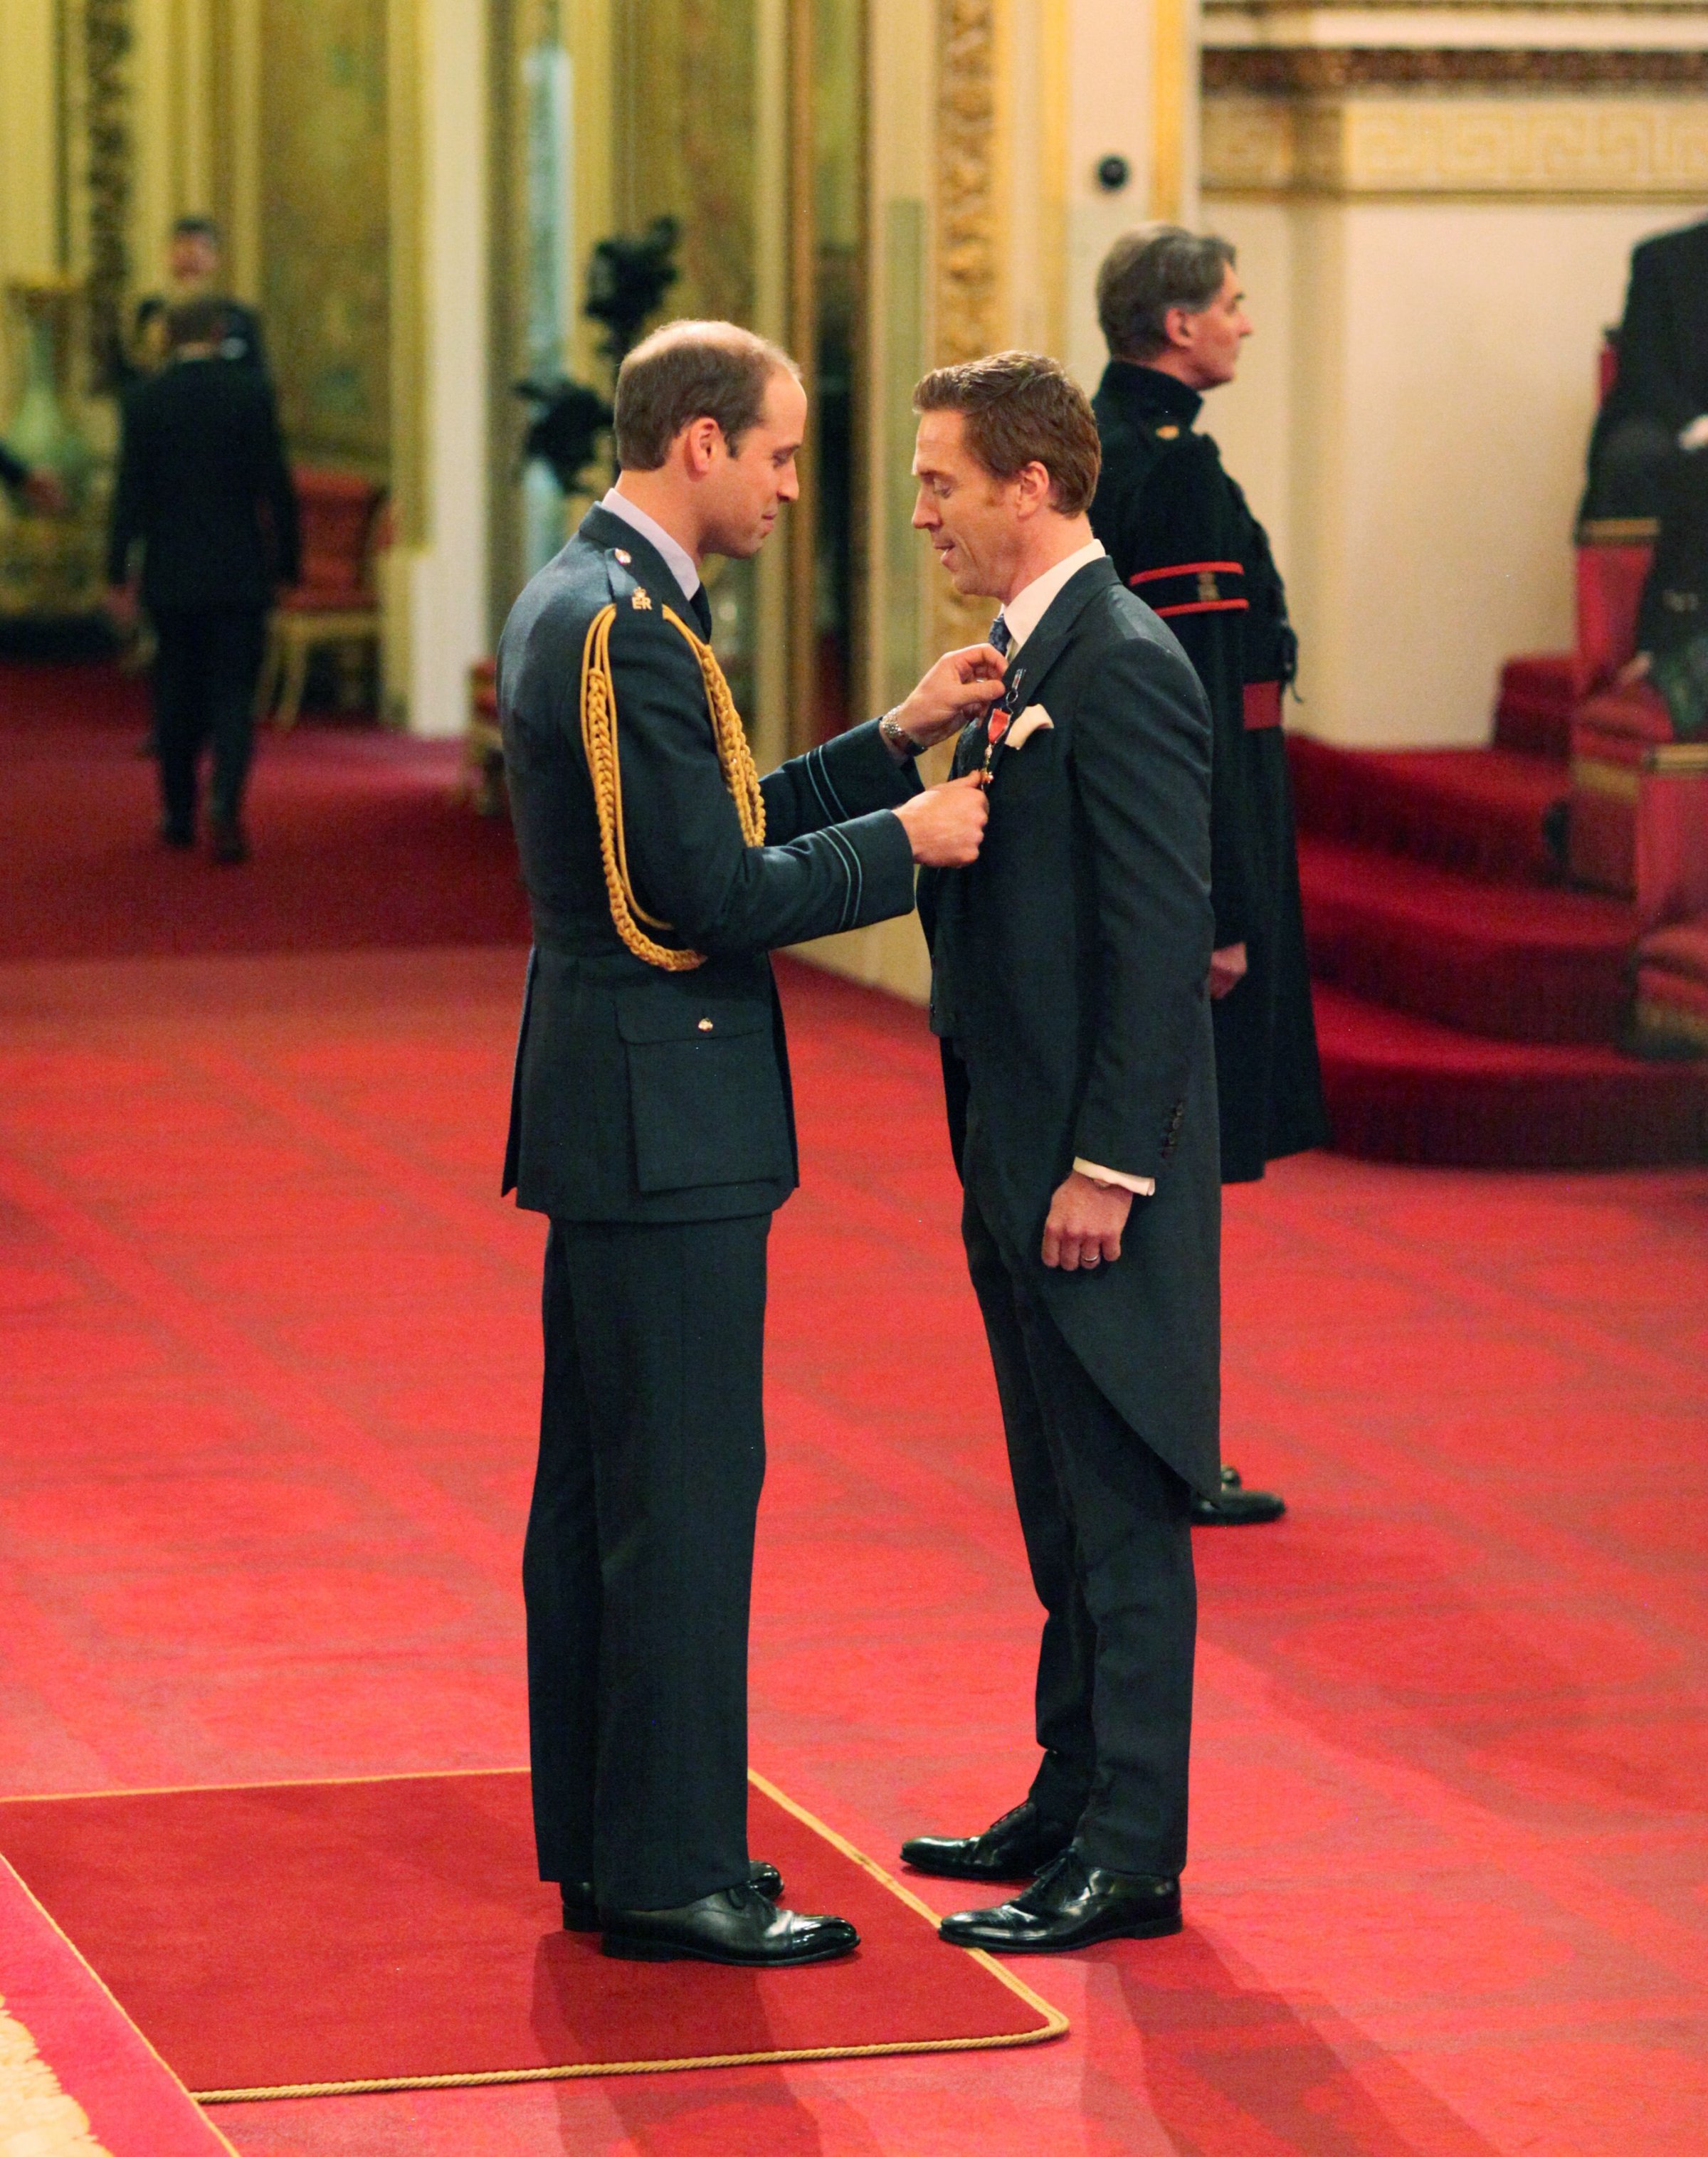 Investitures at Buckingham Palace. Damian Lewis from London is made an Officer of the Order of the British Empire (OBE) by the Duke of Cambridge during an Investiture ceremony at Buckingham Palace on Nov. 26, 2014.